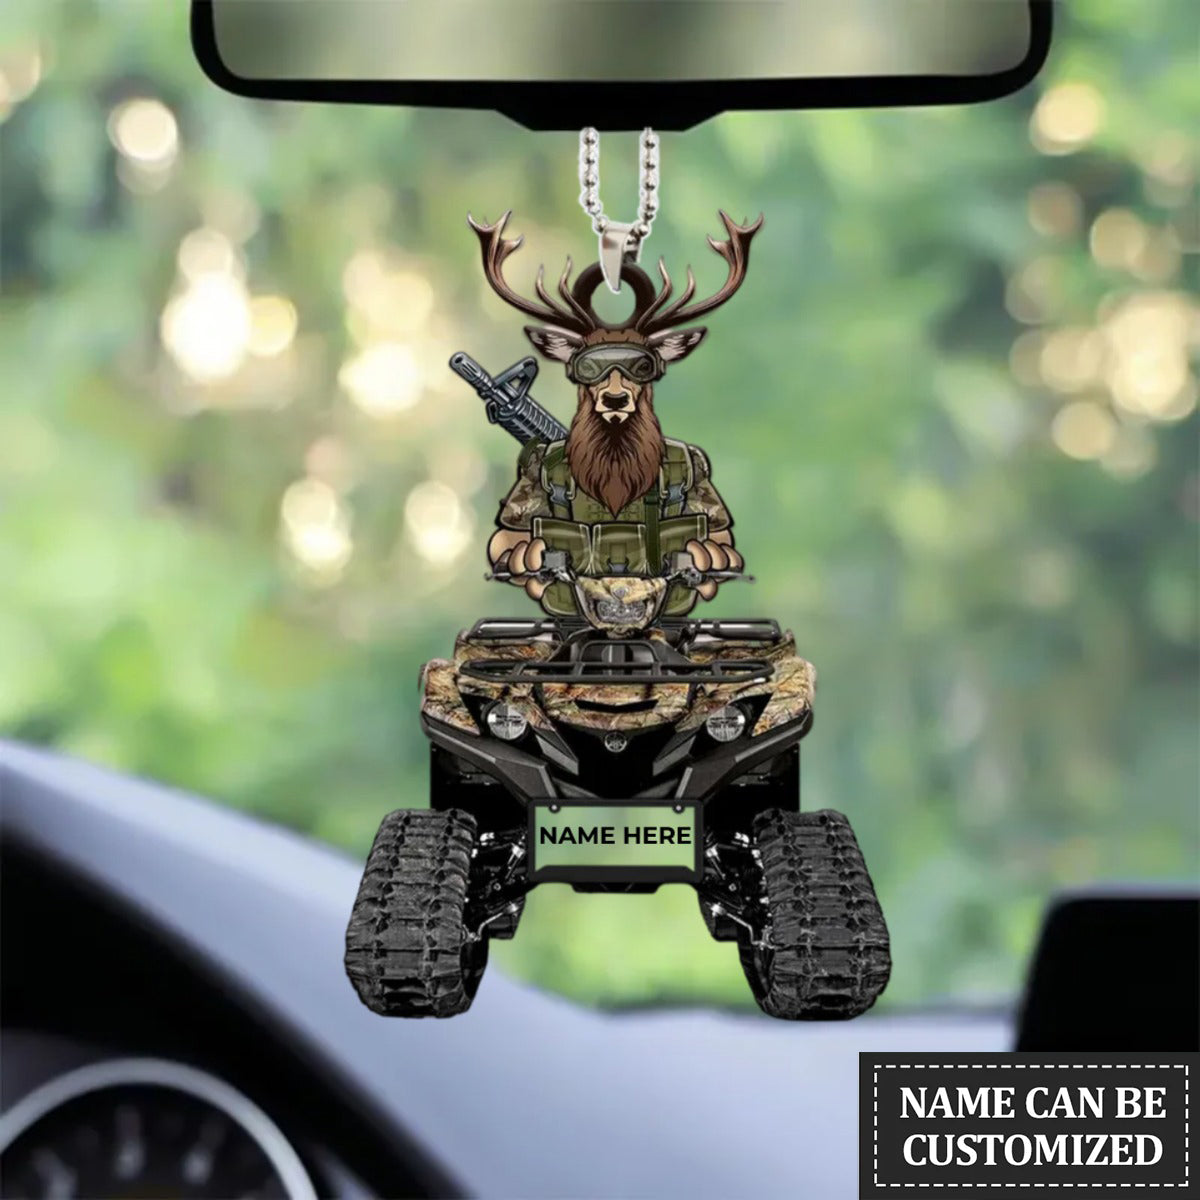 Hunting Car Ornament/ Hunter Vehicle With Deer Personalized Flat Car Hanging Ornament Gift For Hunter